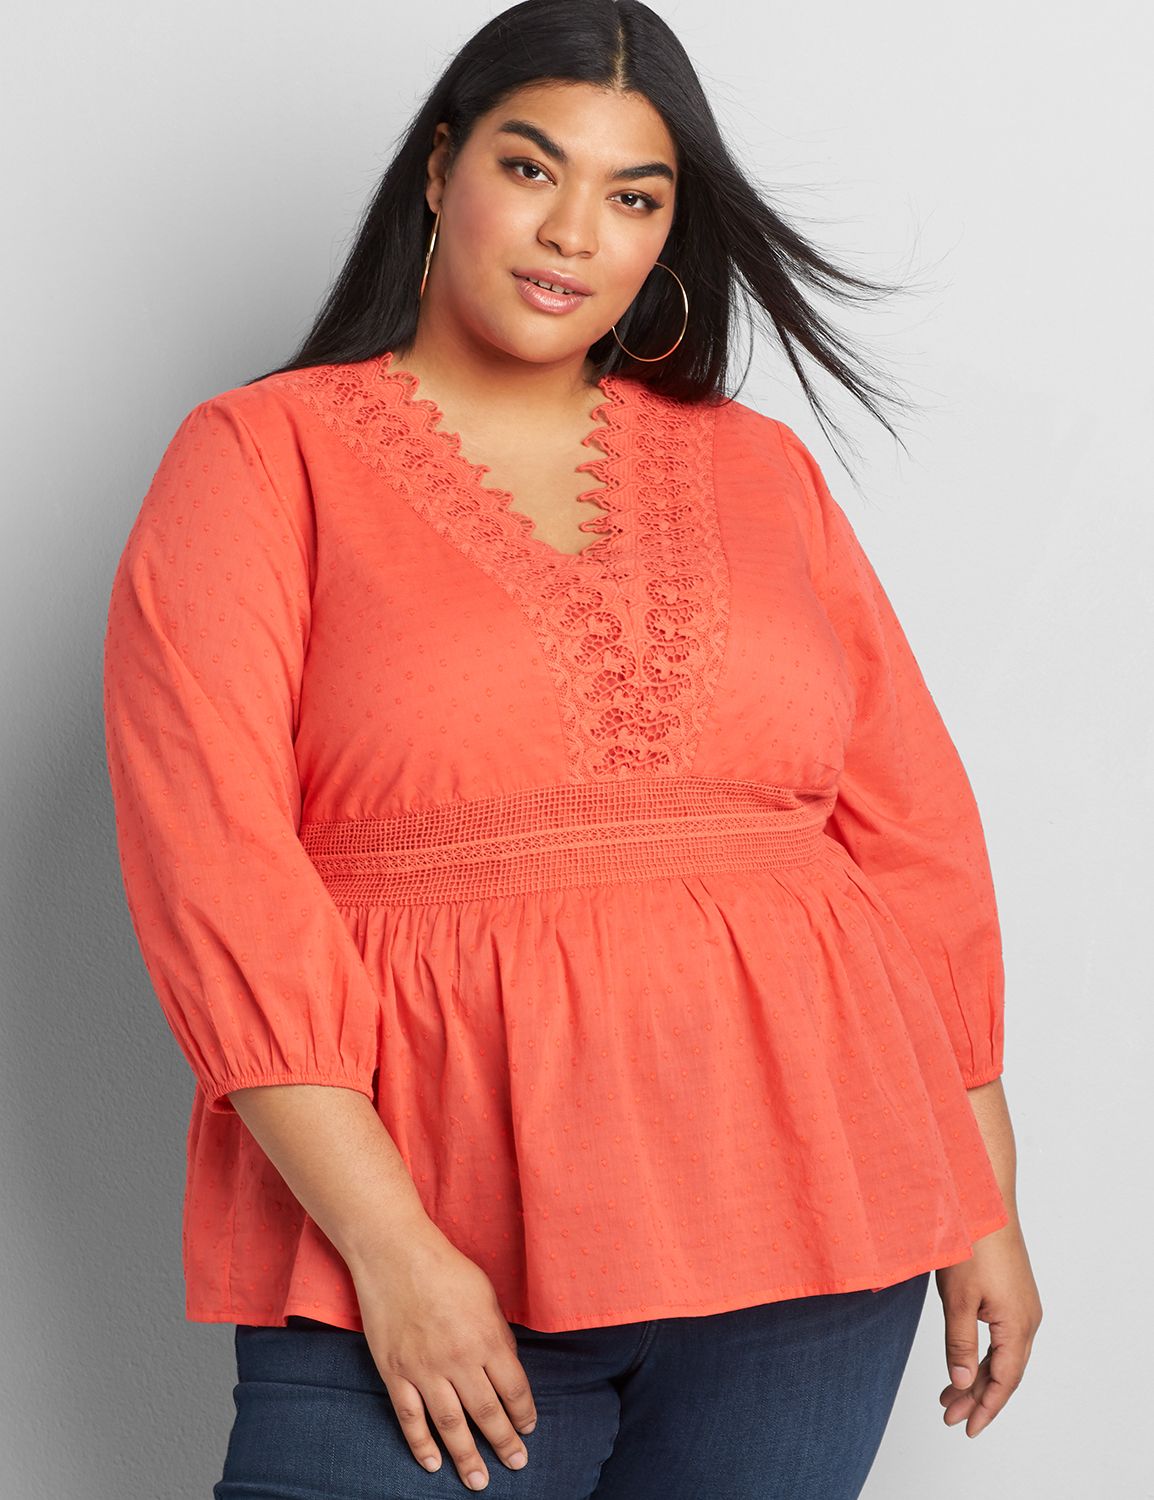 plus size formal tops and jackets